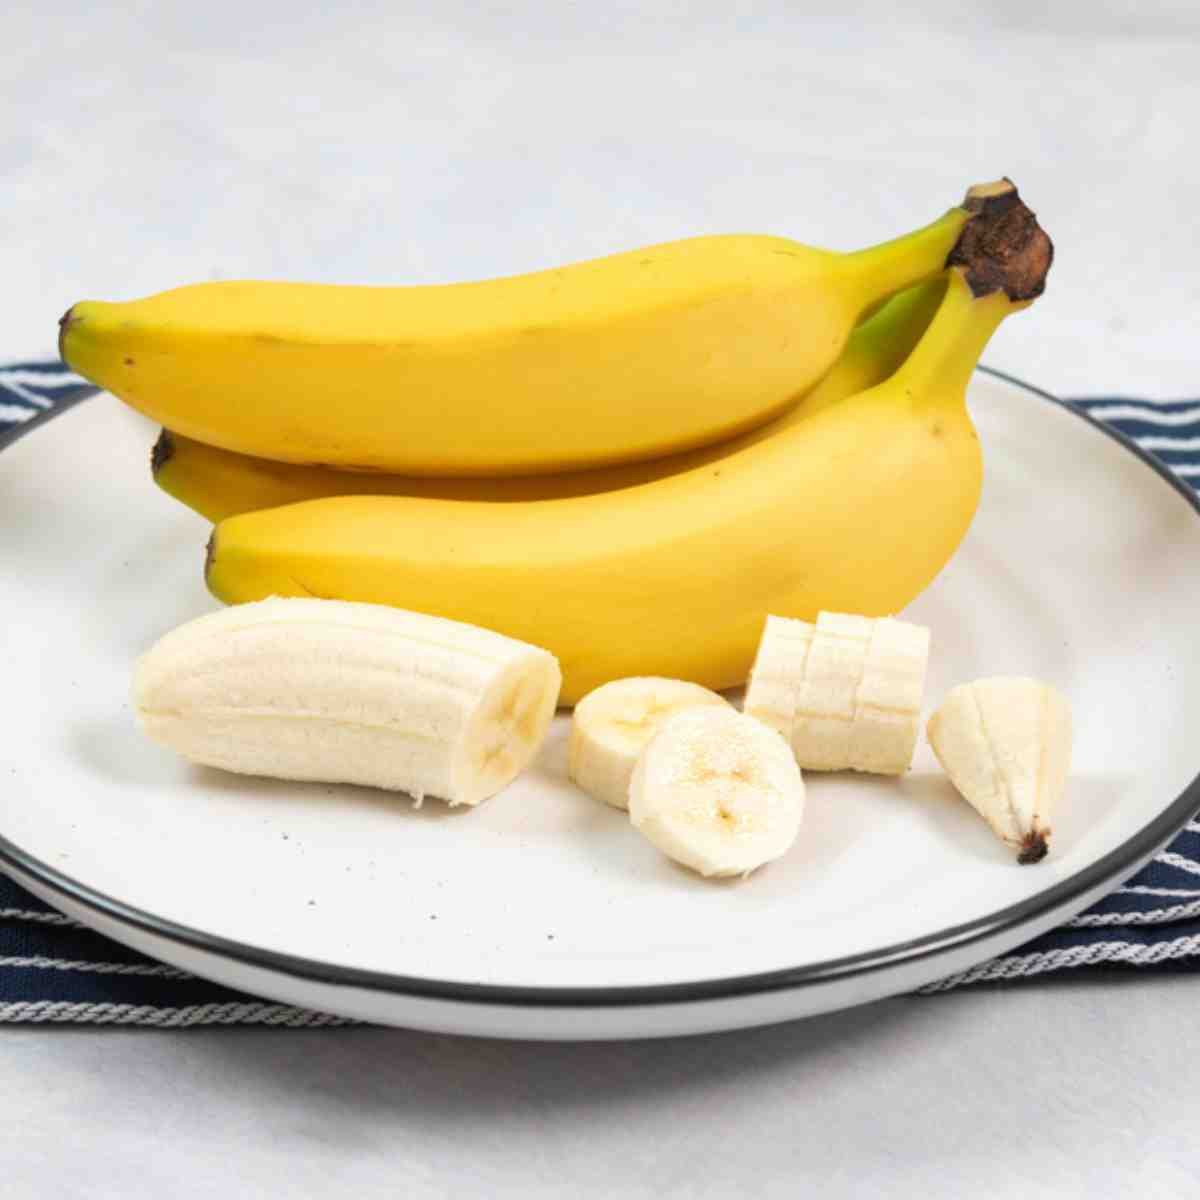 A plate with a bunch of Havana bananas, along with one sliced banana.